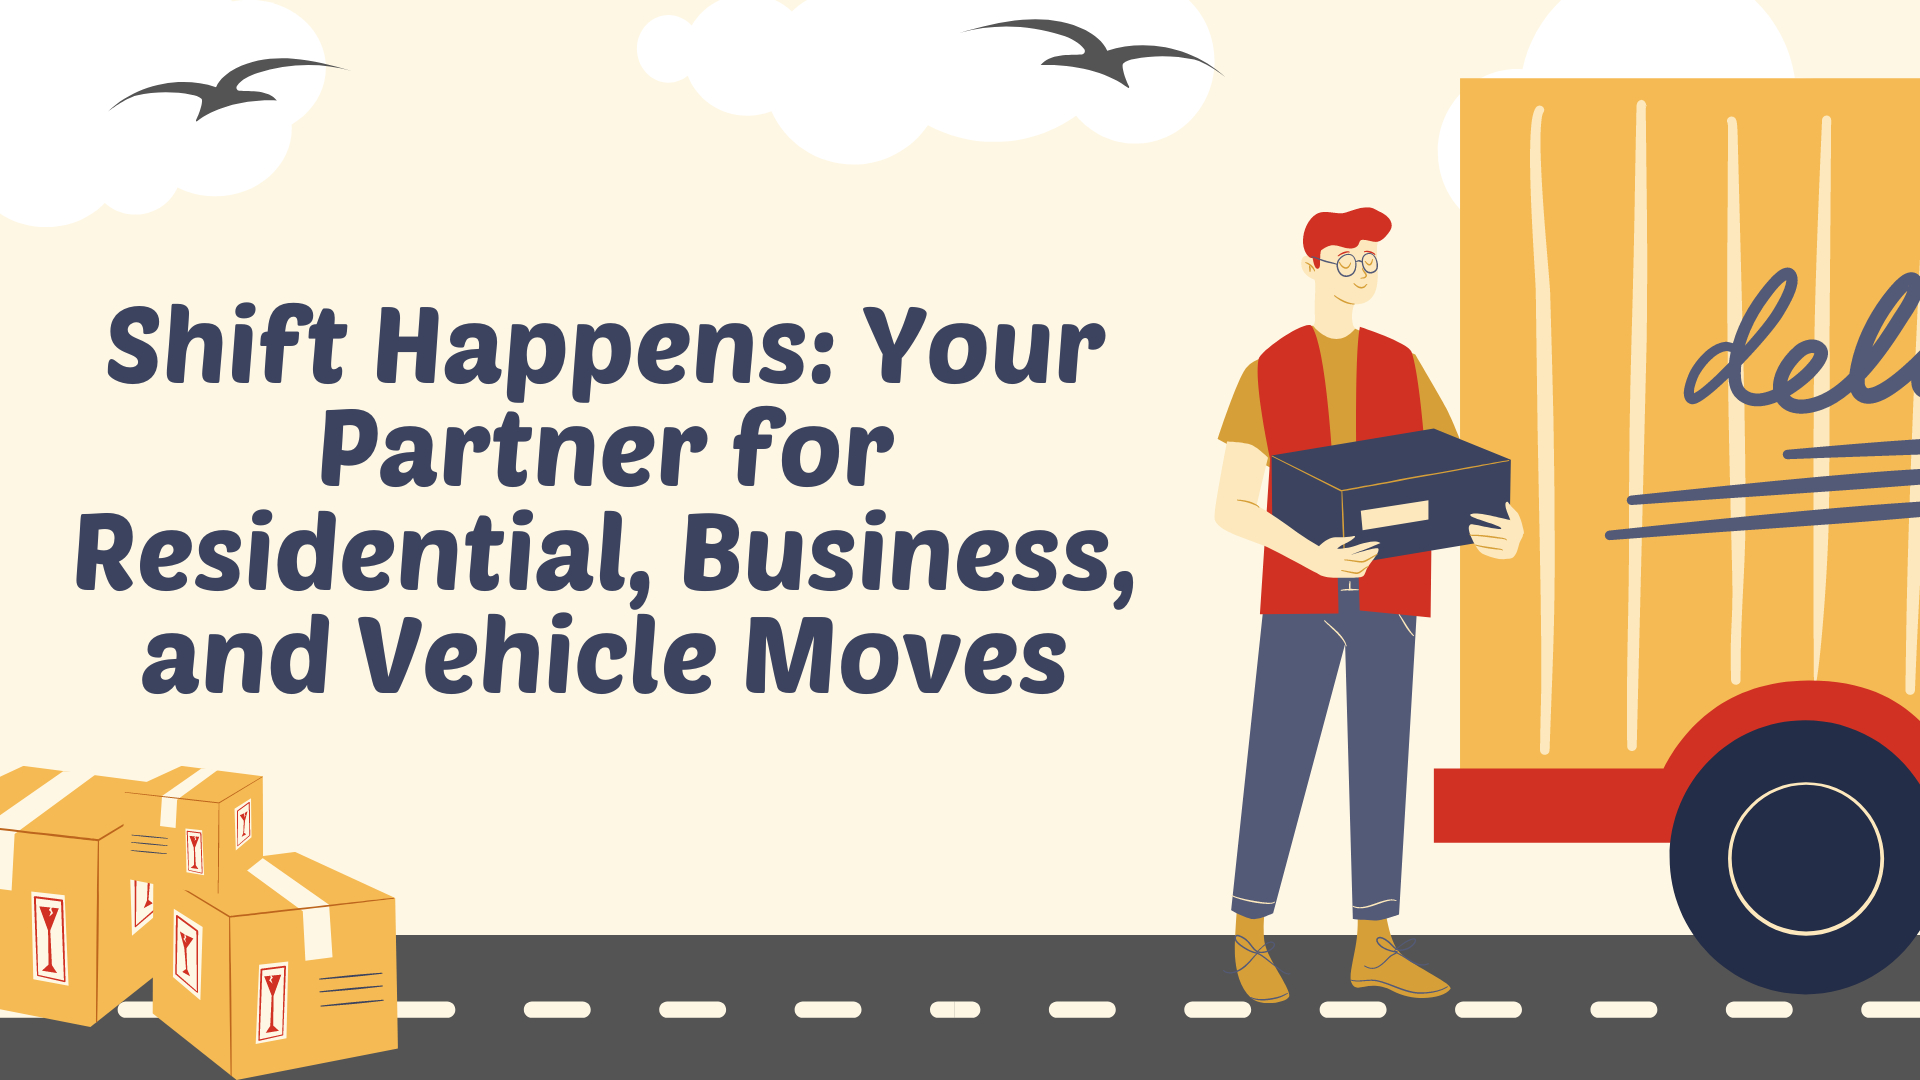 Shift Happens: Your Partner for Residential, Business, and Vehicle Moves